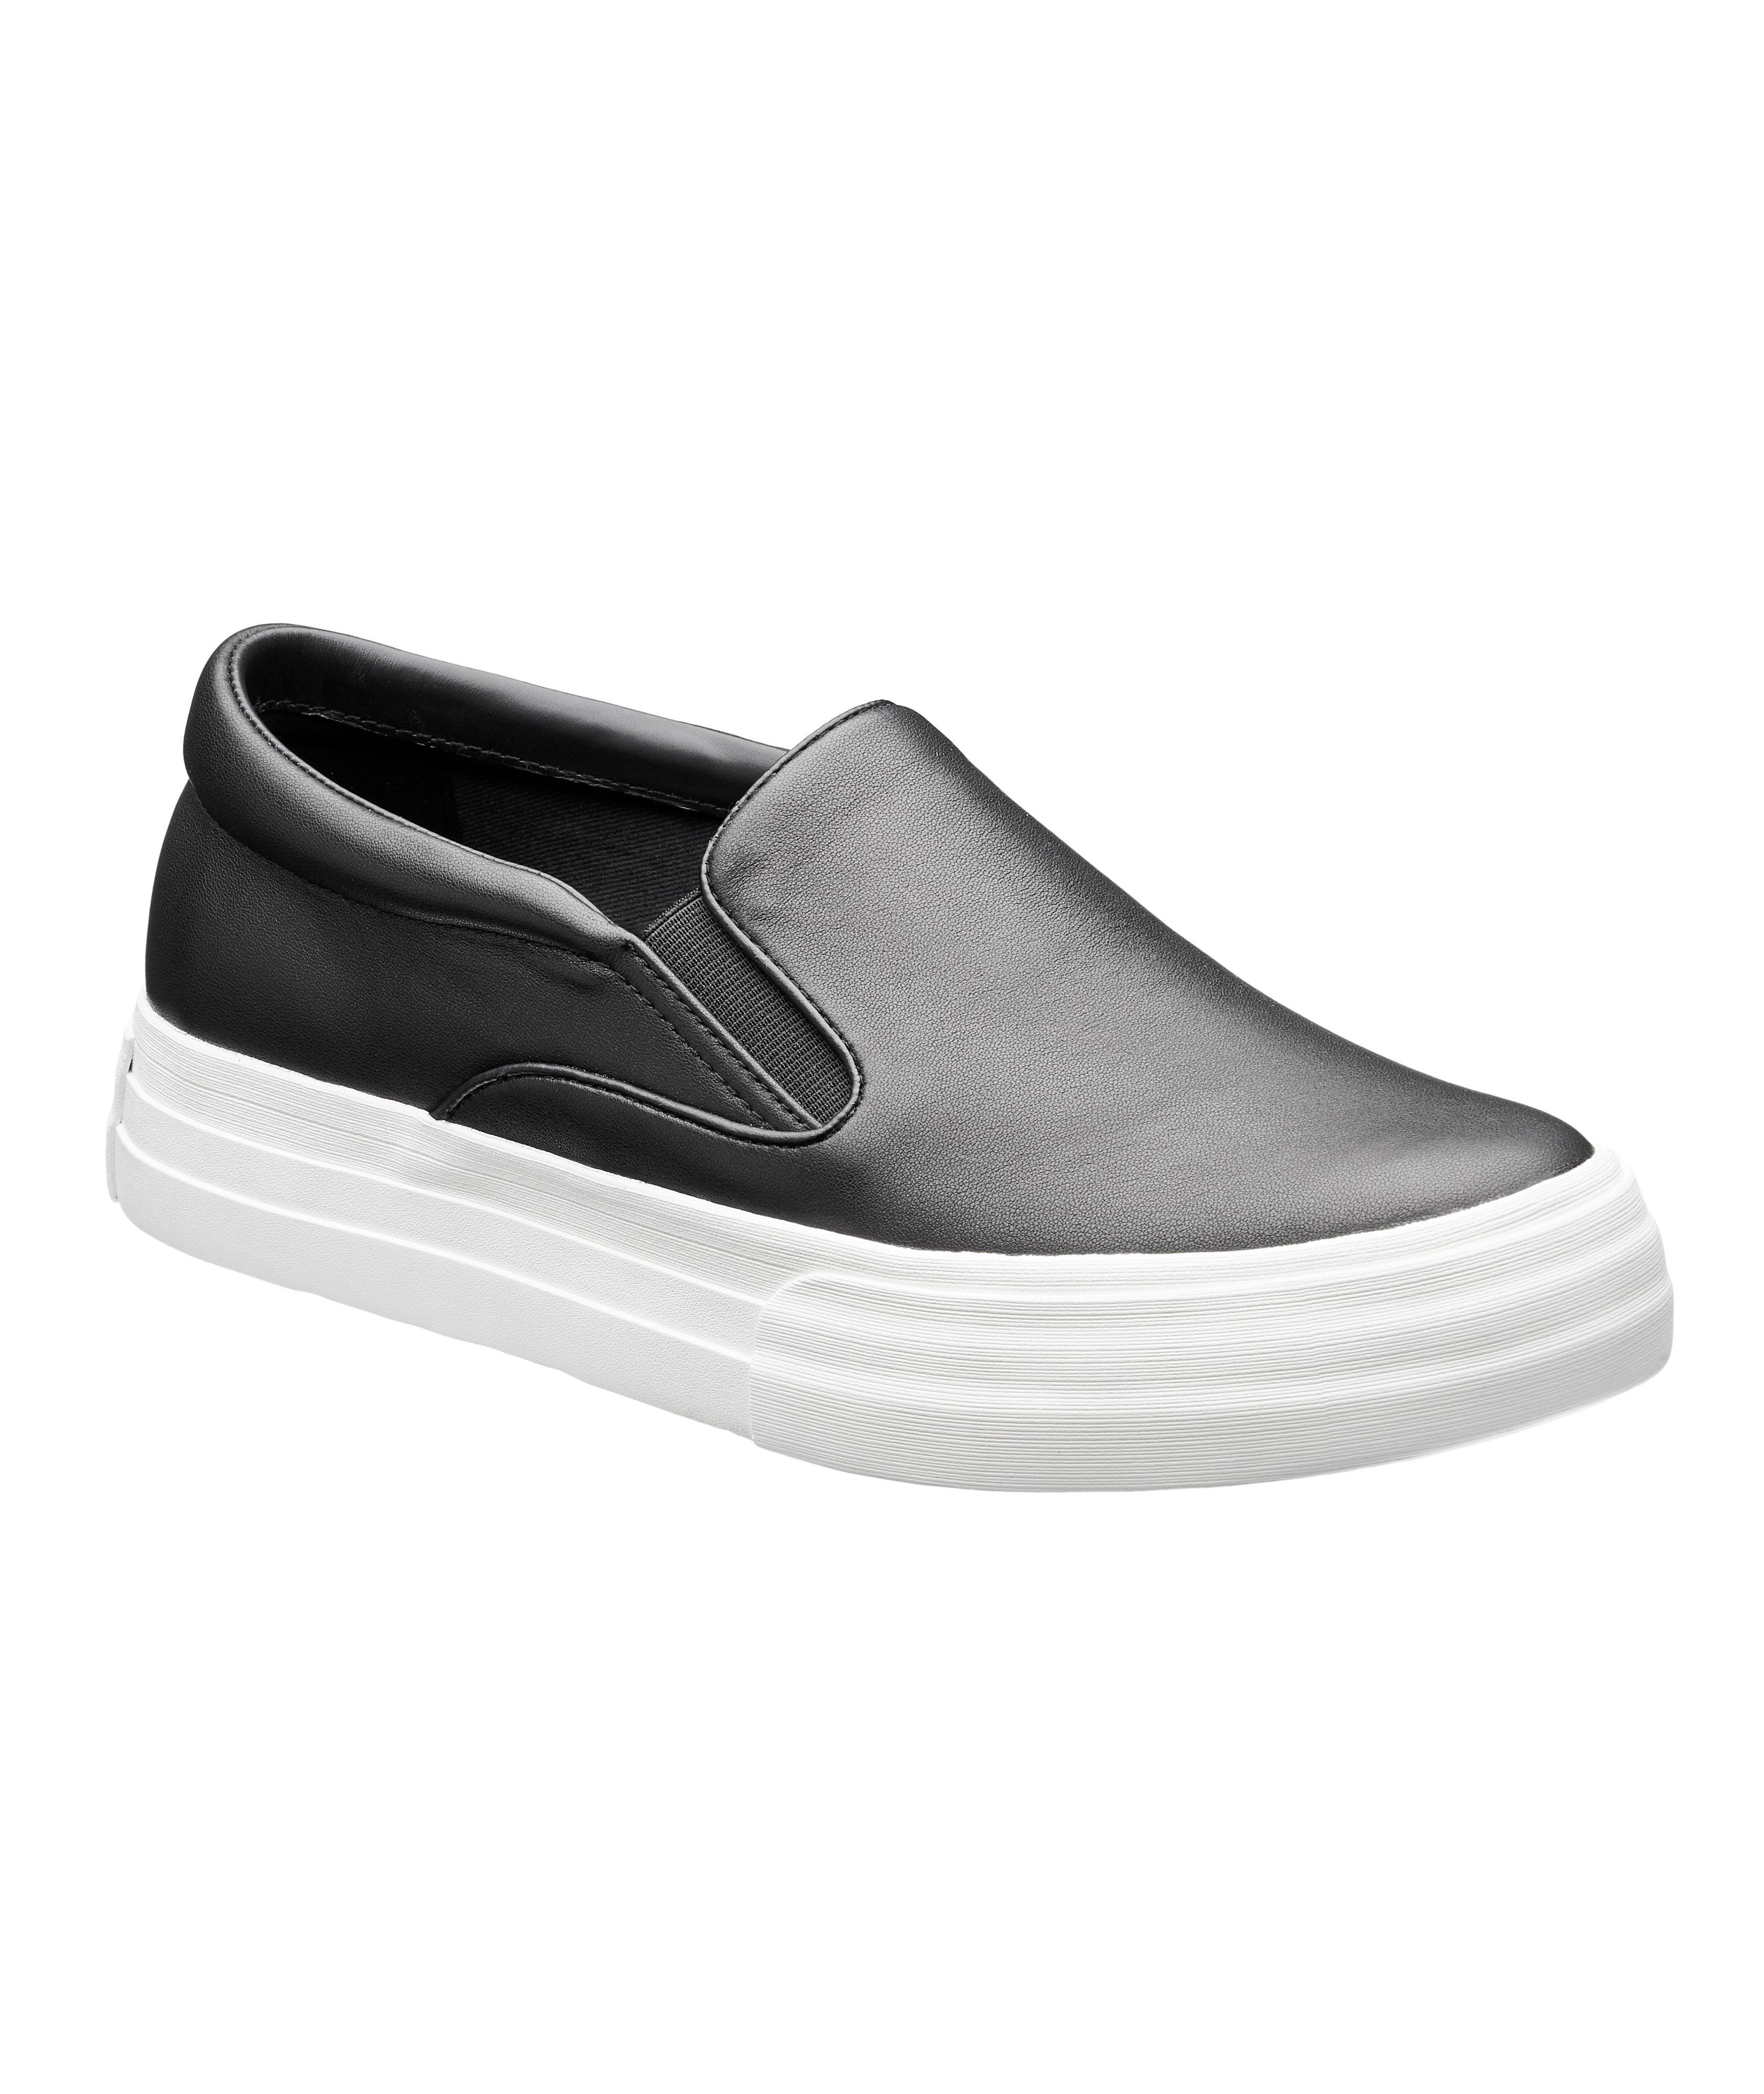 Slip-On Leather Sneakers image 0